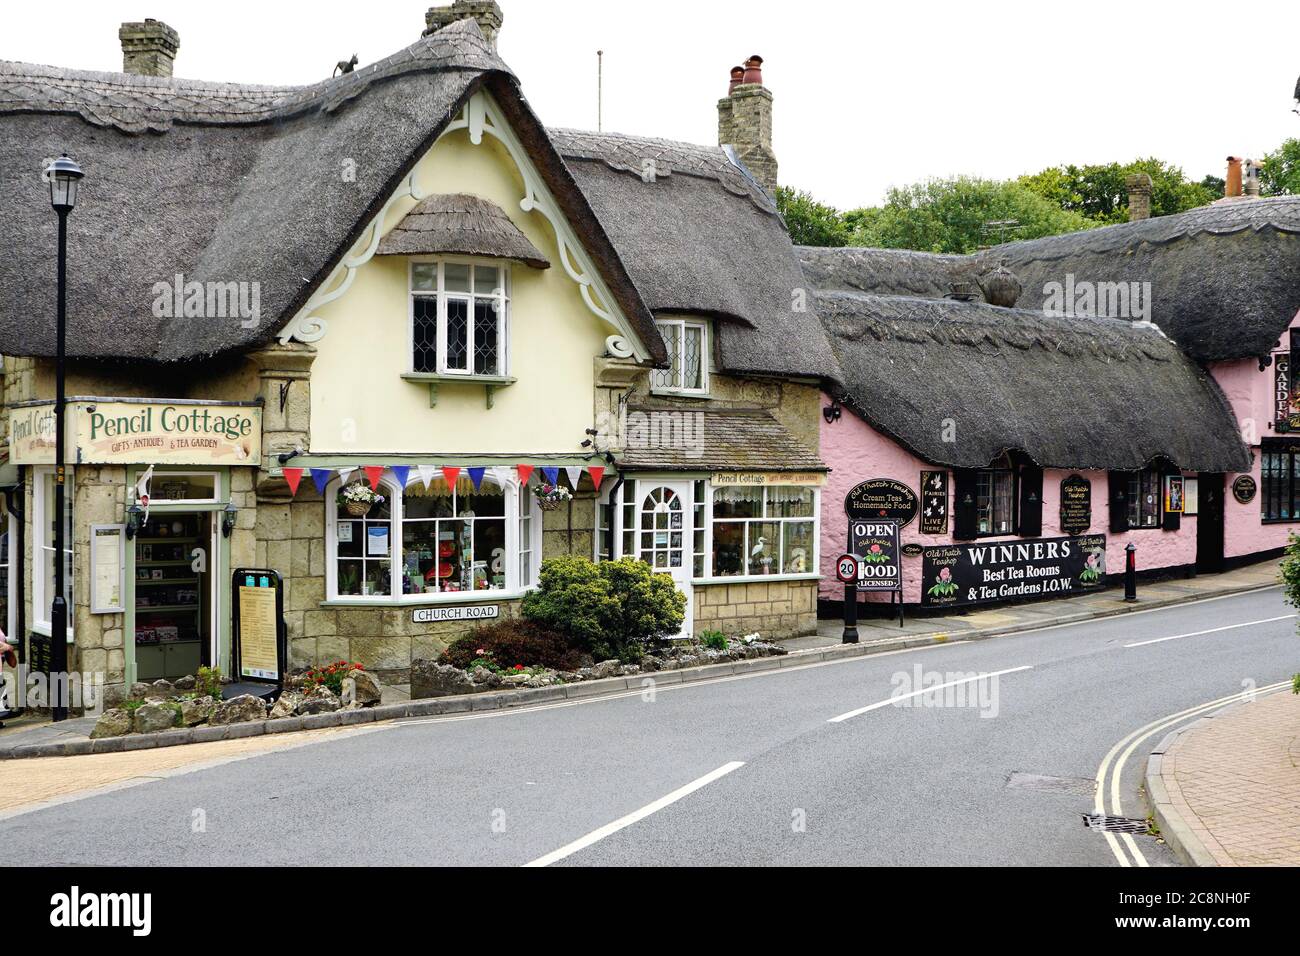 Shanklin, Isle of Wight, UK. July 14, 2020.  Beautiful Thatched cottages in the old town at shanklin on the Isle of Wight, UK. Stock Photo